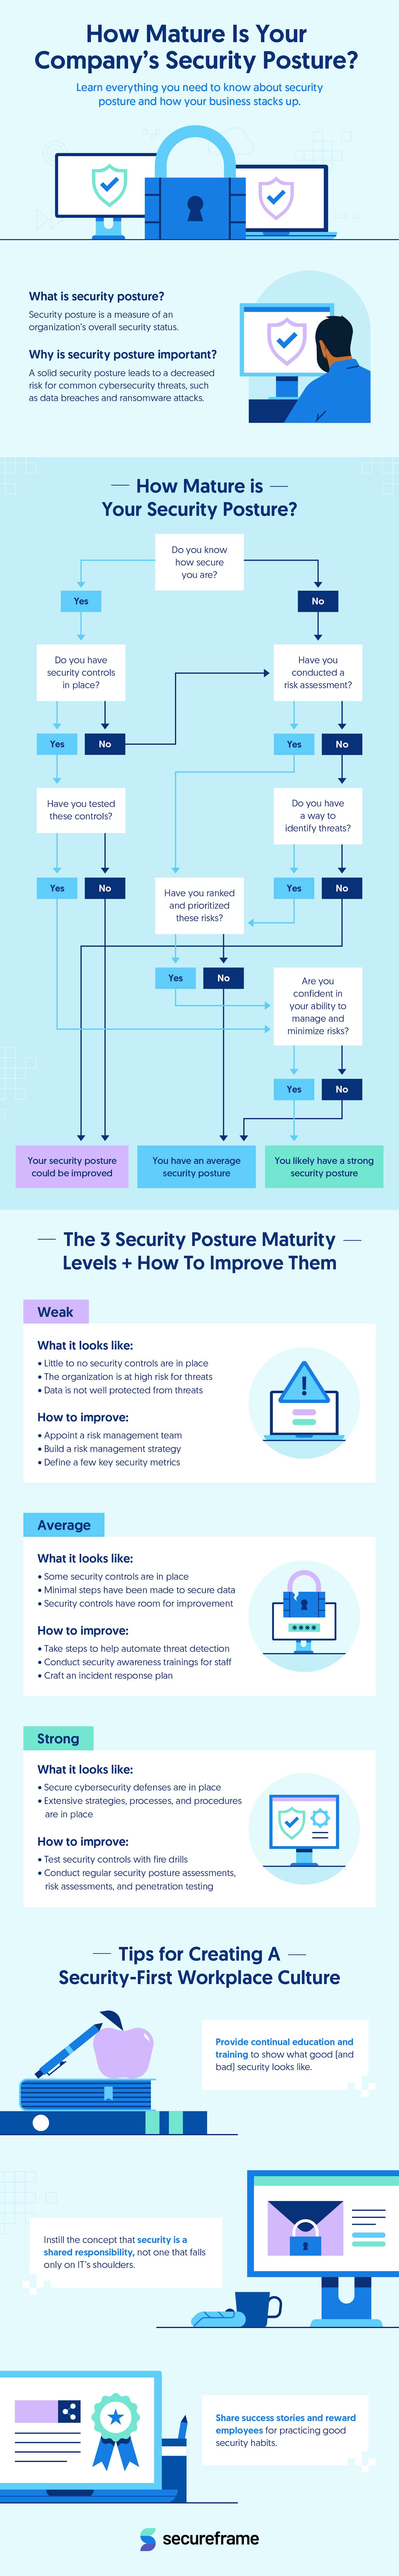 Infographic that covers what security posture is, a flowchart to help you determine your security posture, tips for how to improve it, and tips for creating a more security-minded workplace.